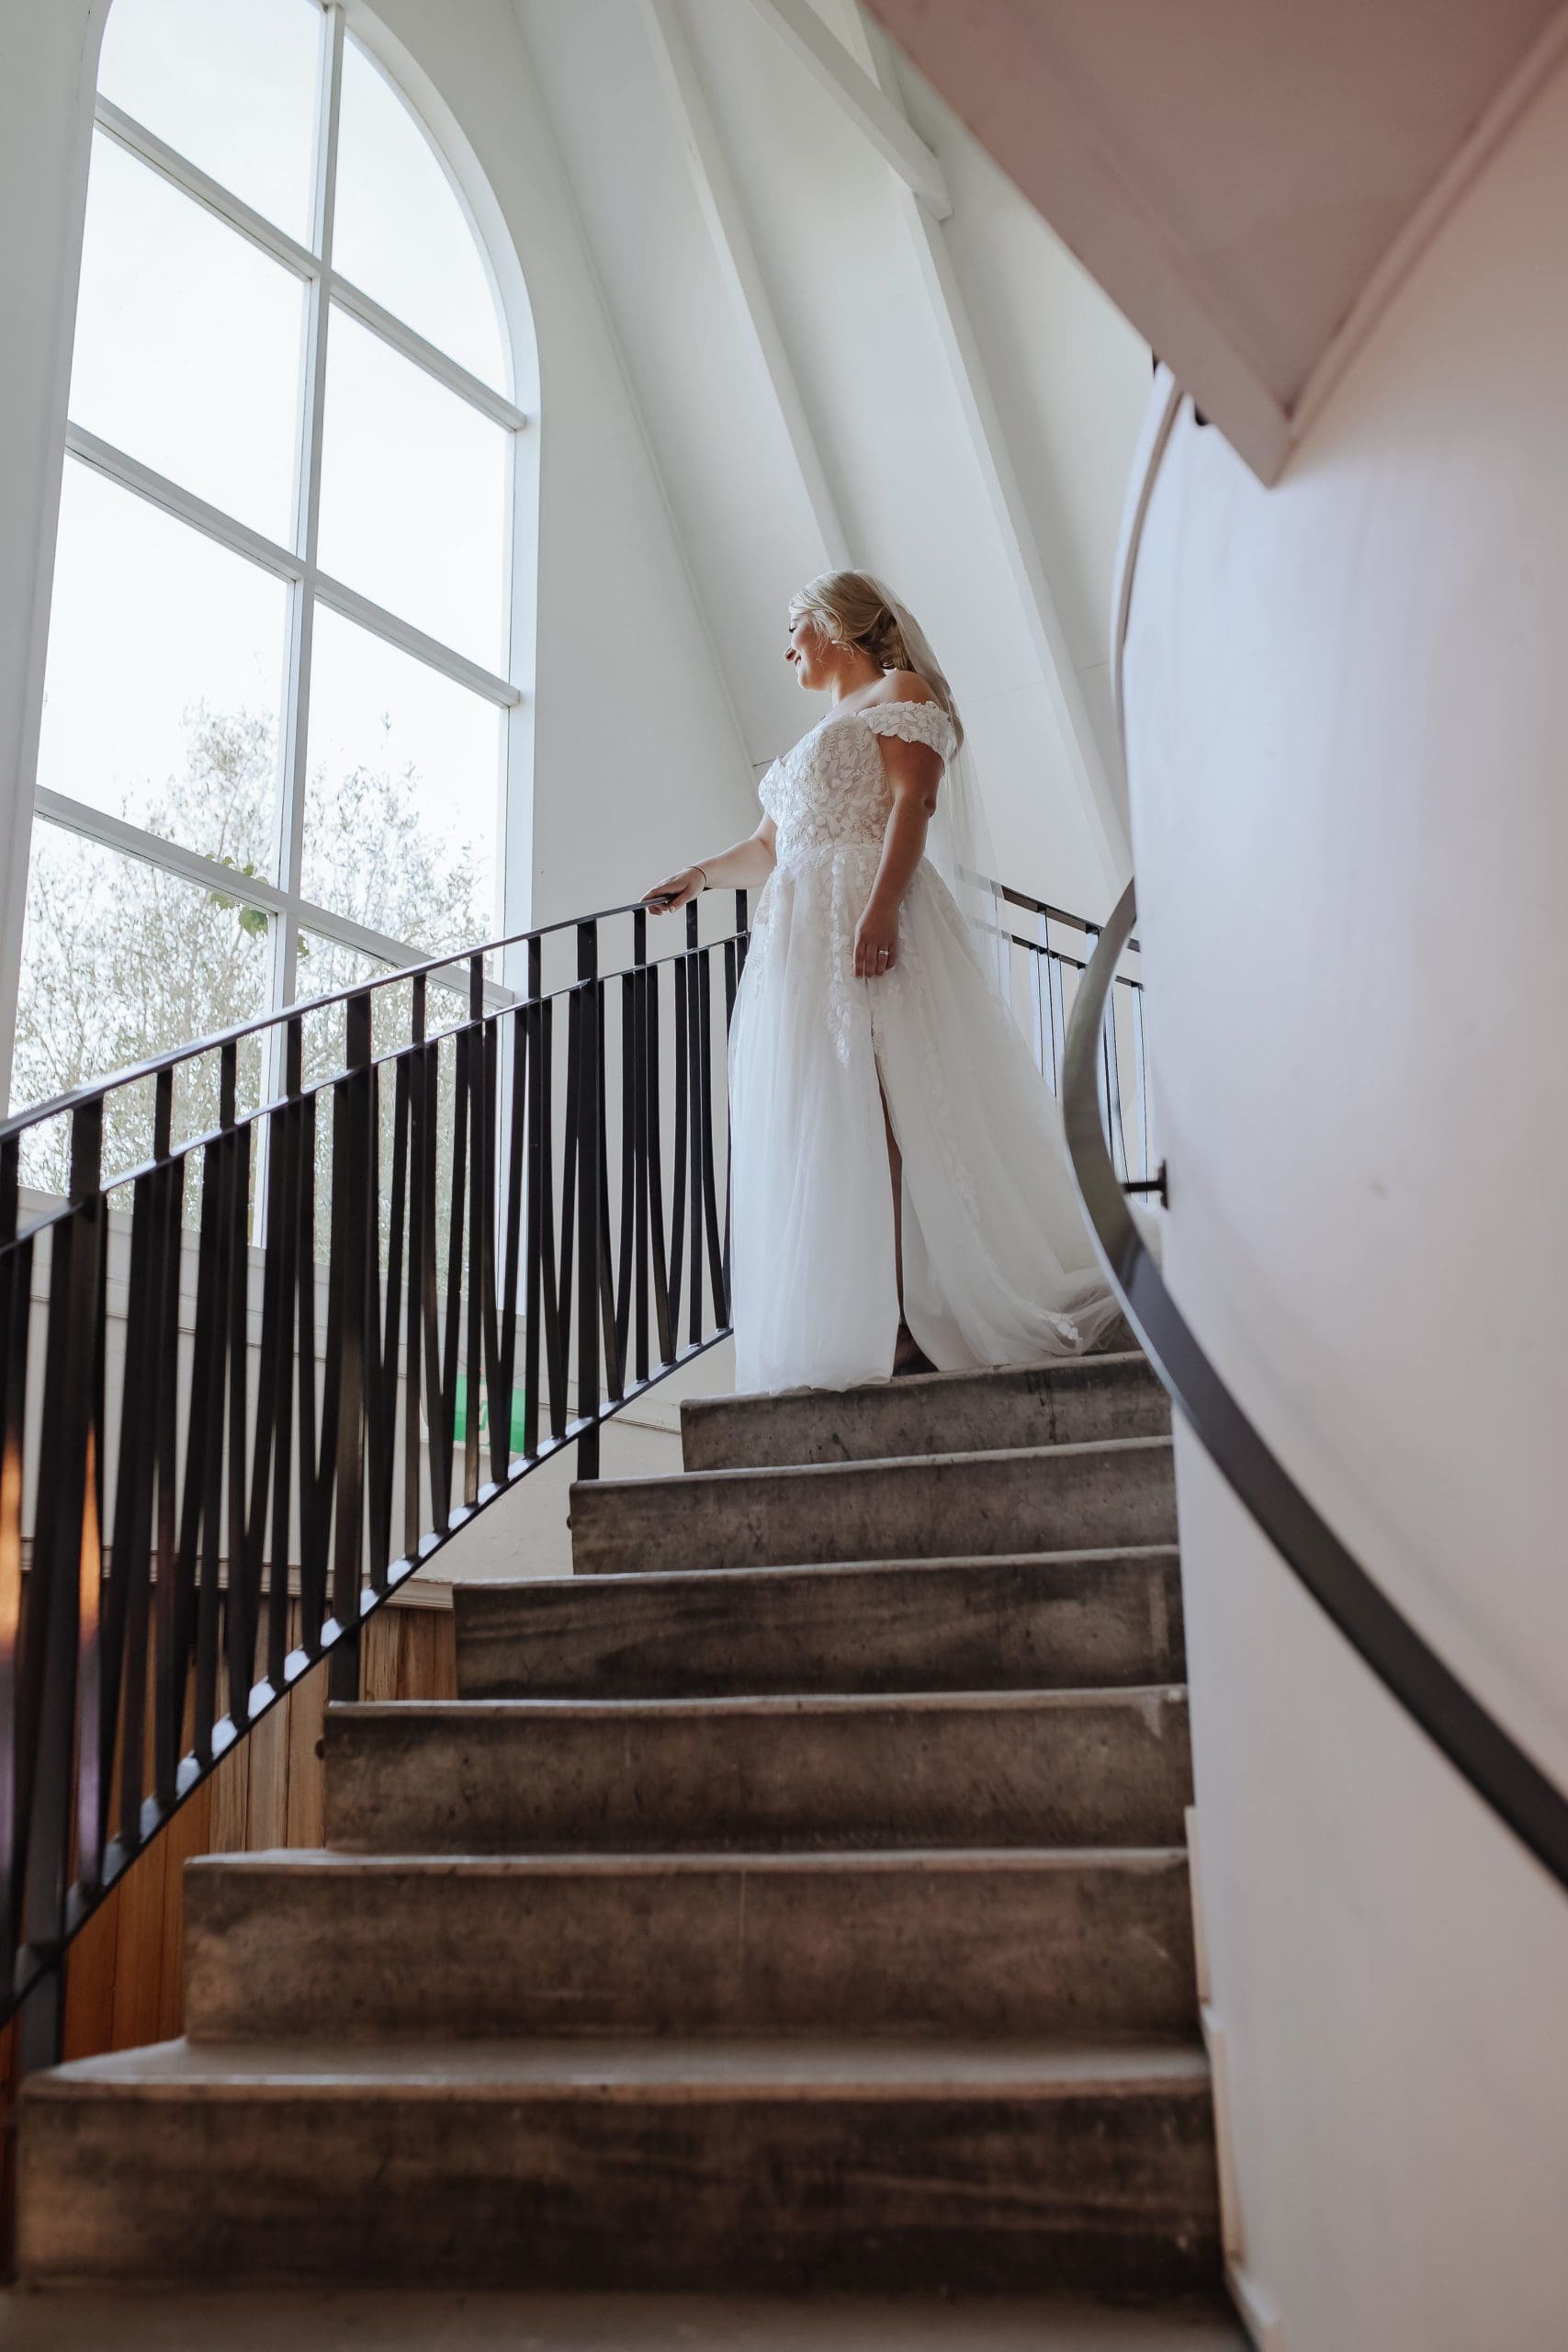 Olivia in the Carlee by Justin Alexander wedding dress